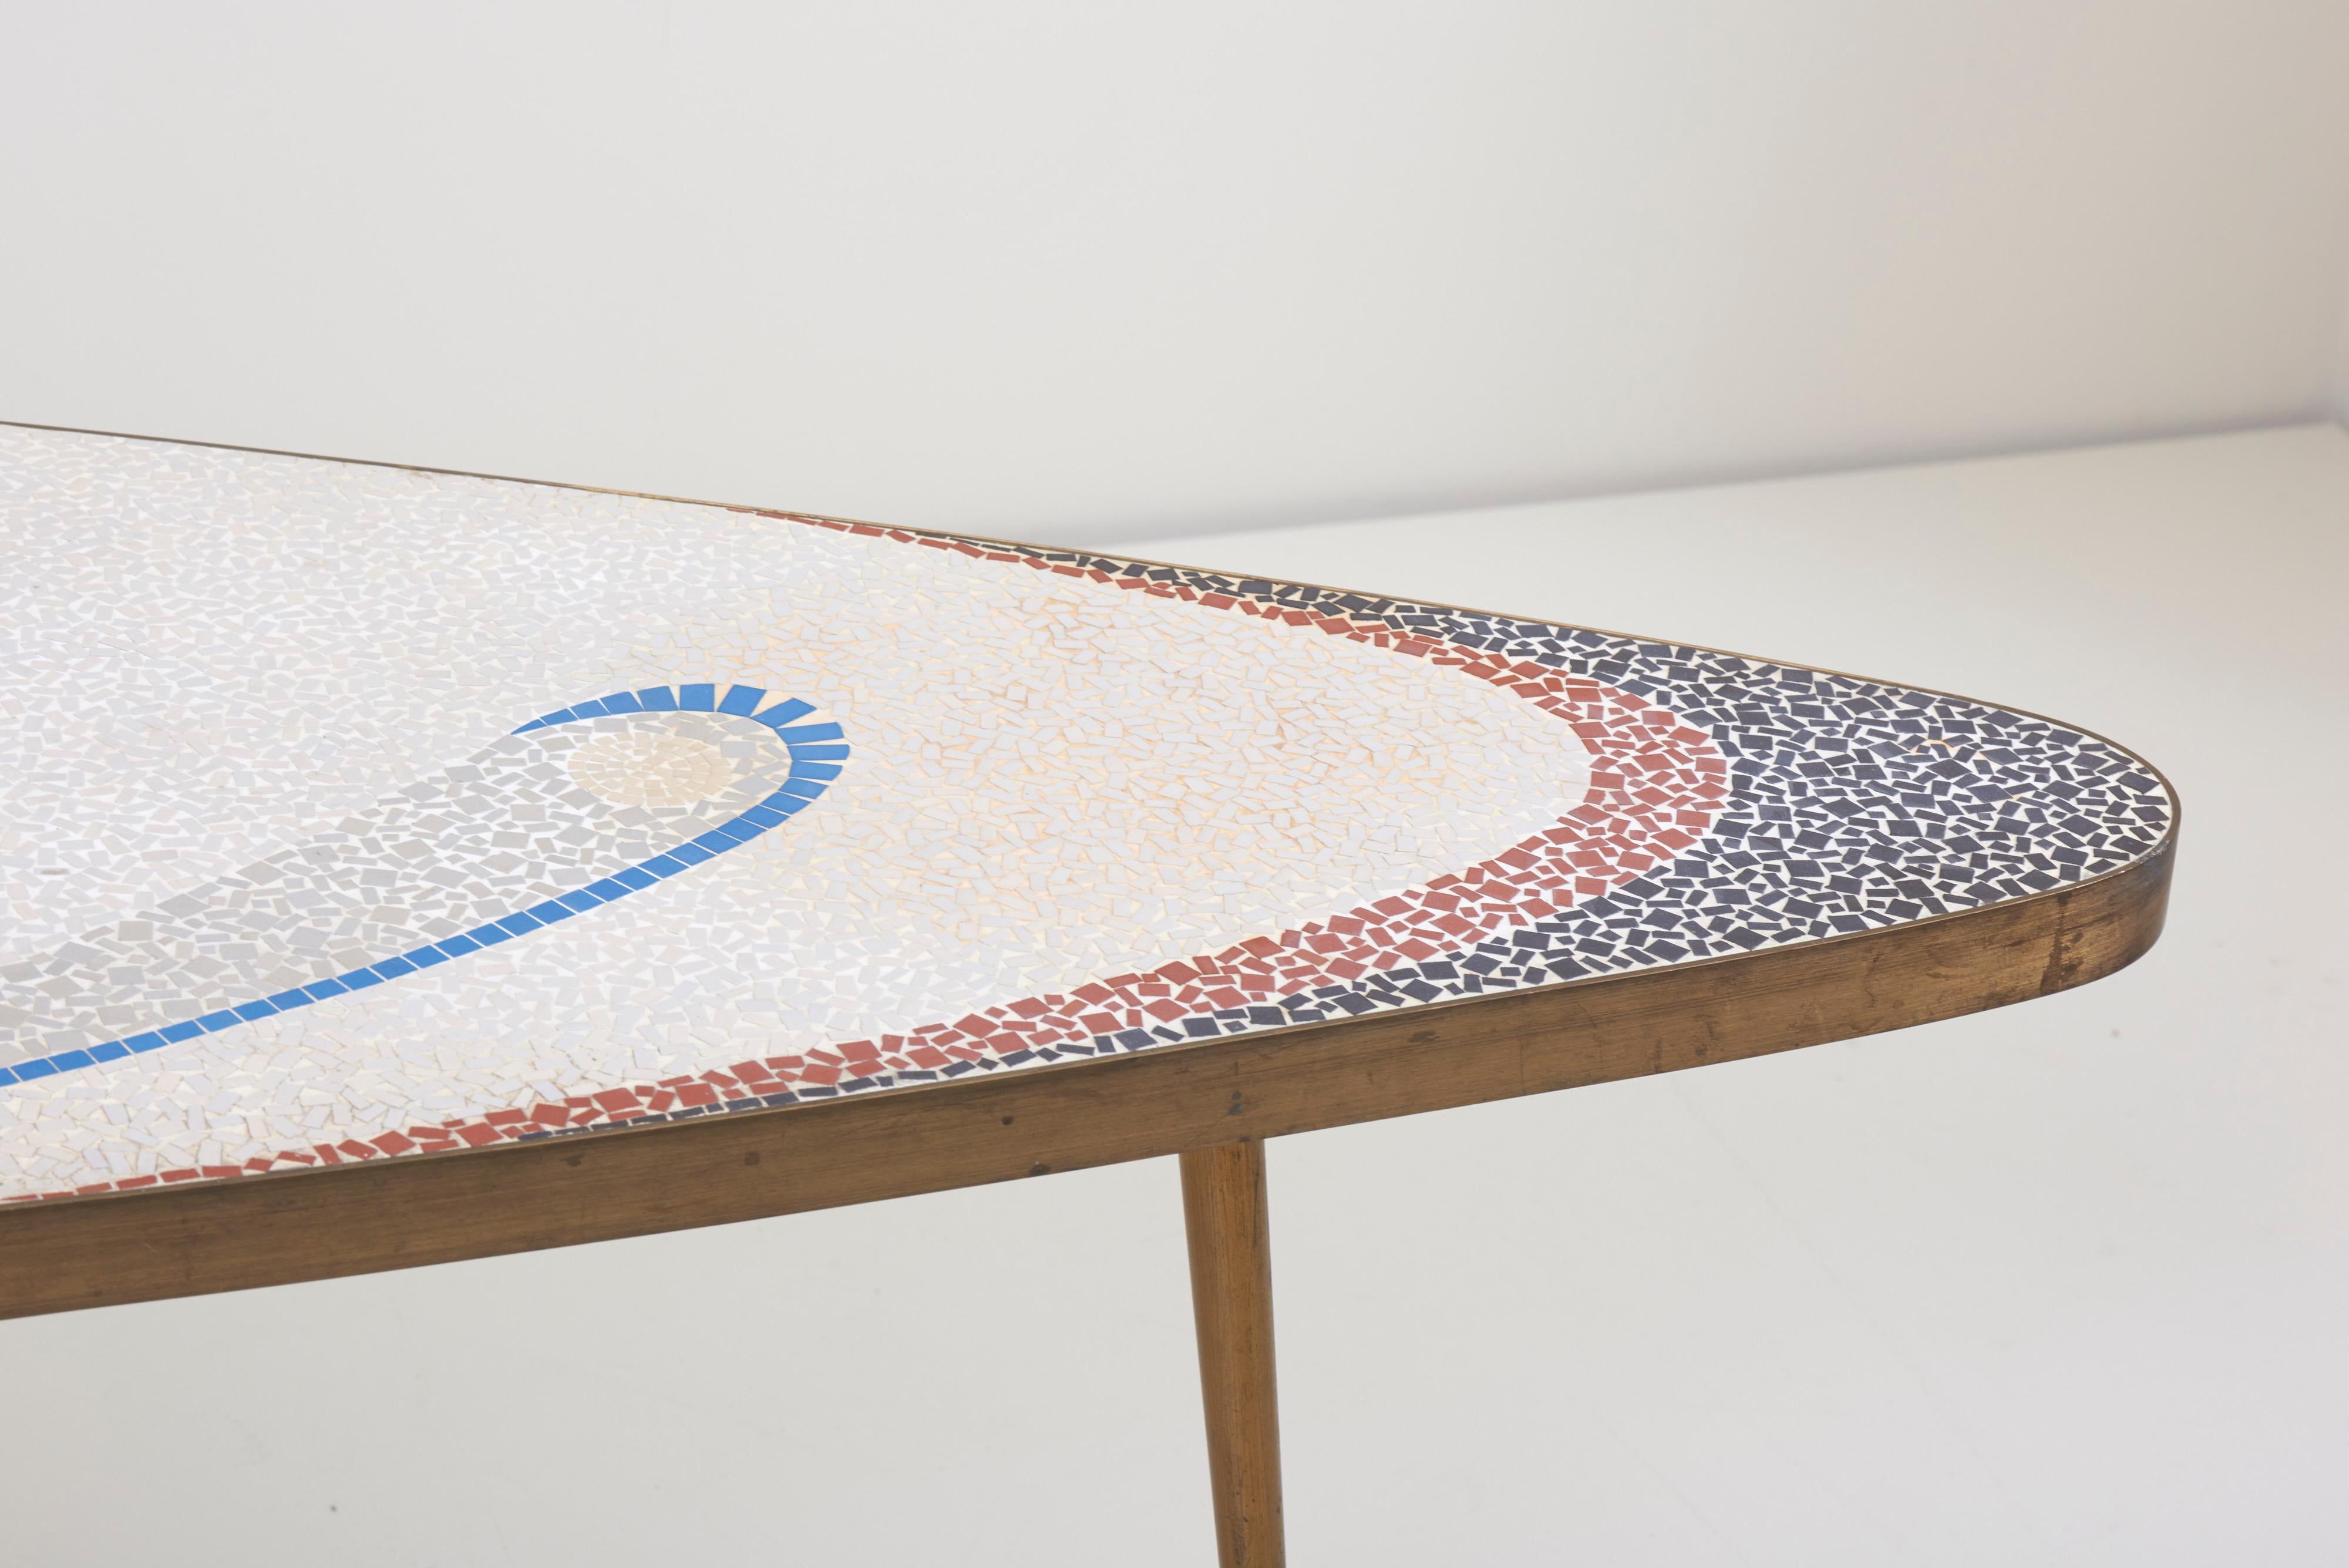 Mid-20th Century Kidney-Shaped Mosaic Coffee Table by Berthold Müller Oerlinghausen, Germany